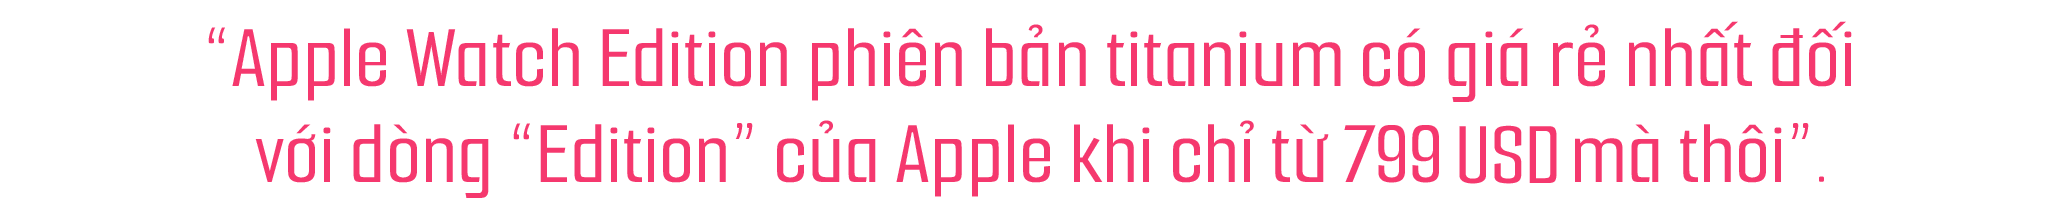 applewatch_quote_10.png